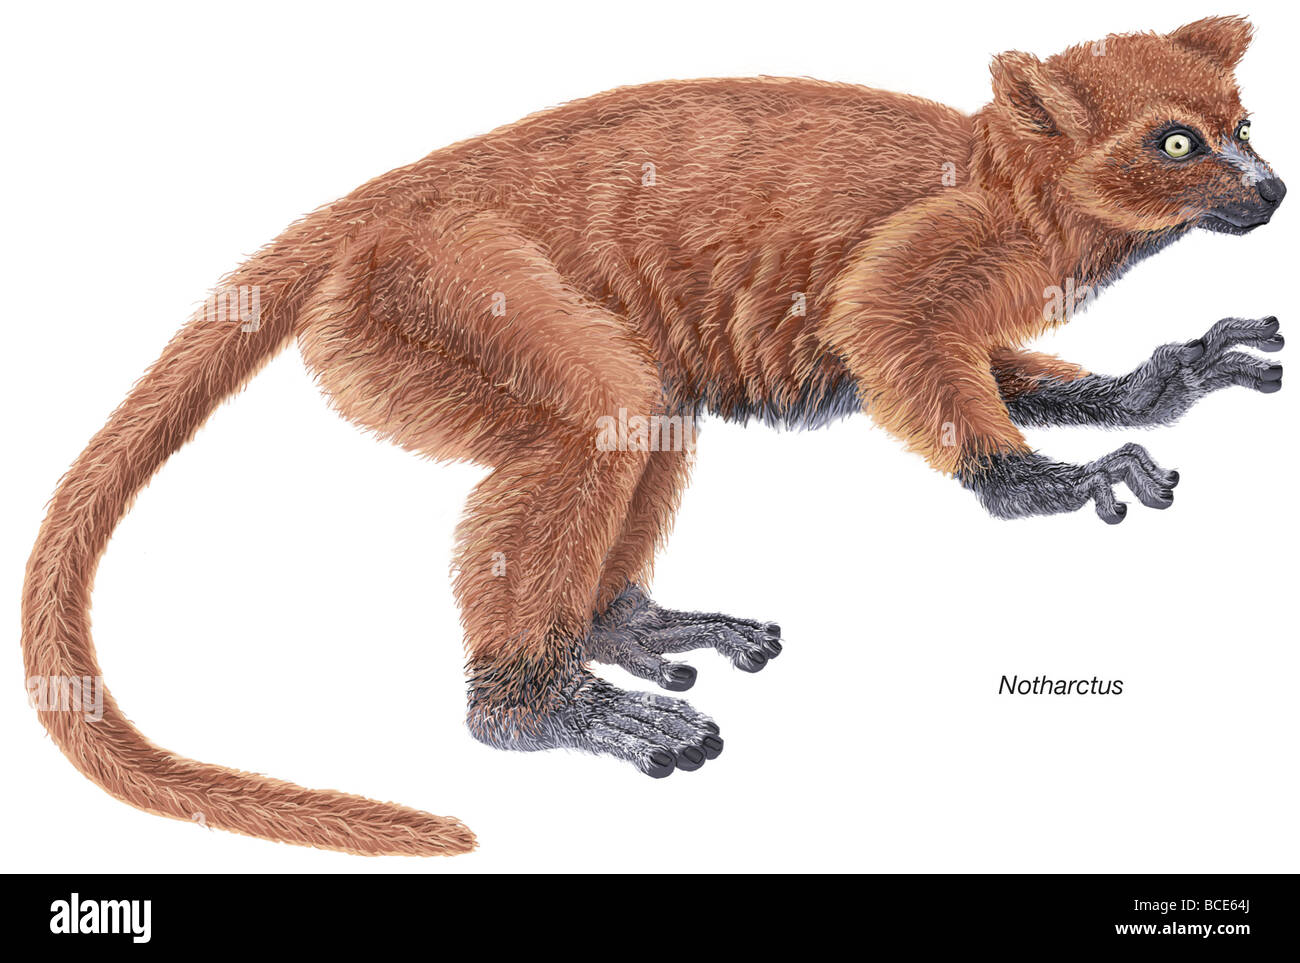 Notharctus, an extinct genus of small primates from the Eocene Epoch that shares many similarities with modern lemurs. Stock Photo